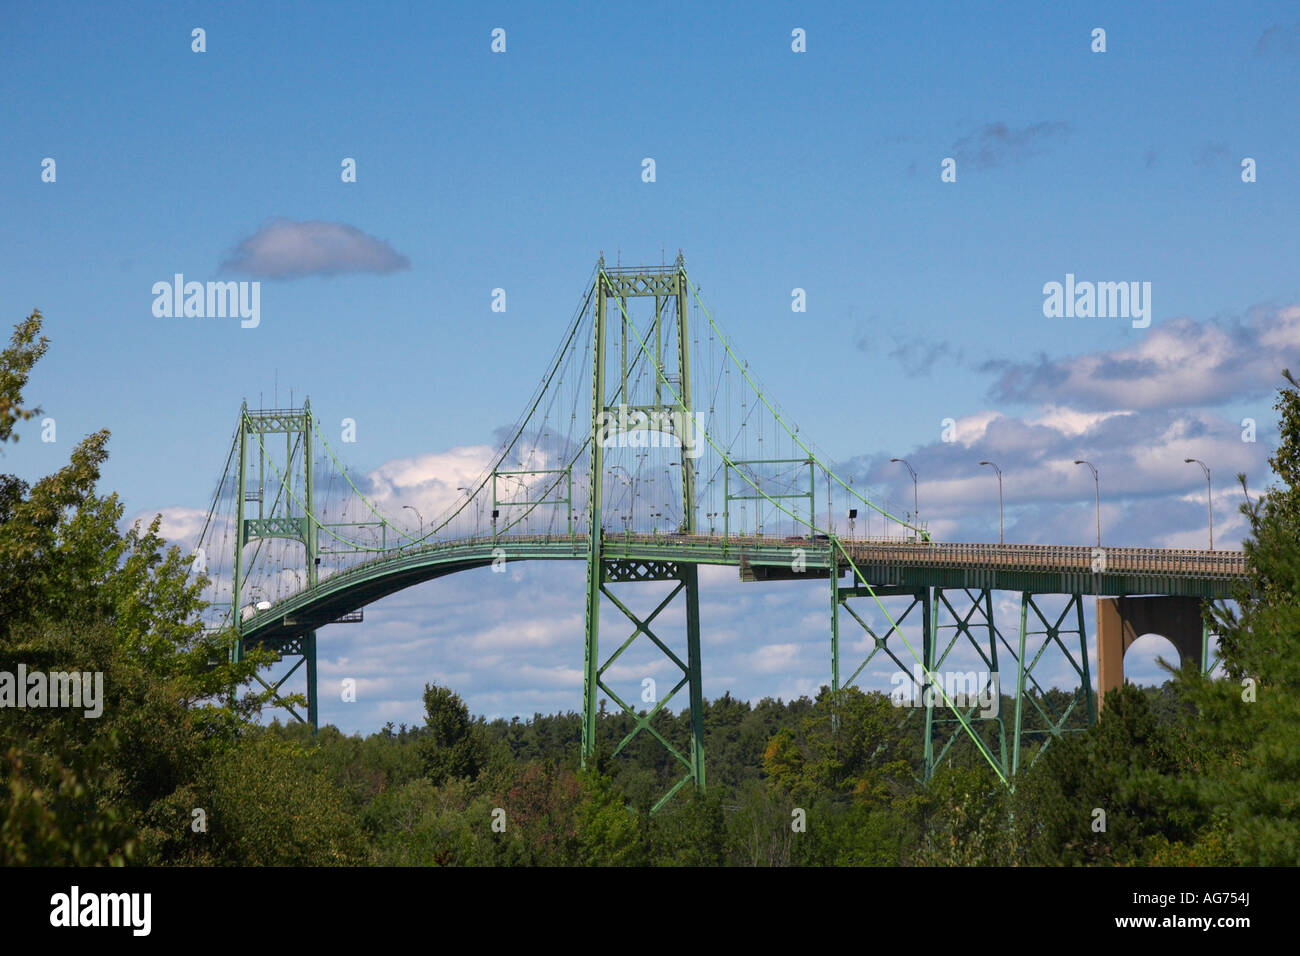 Thousand Islands Bridge over the St Lawrence River in the St Lawrence Seaway Thousand Islands Region of New York State Stock Photo